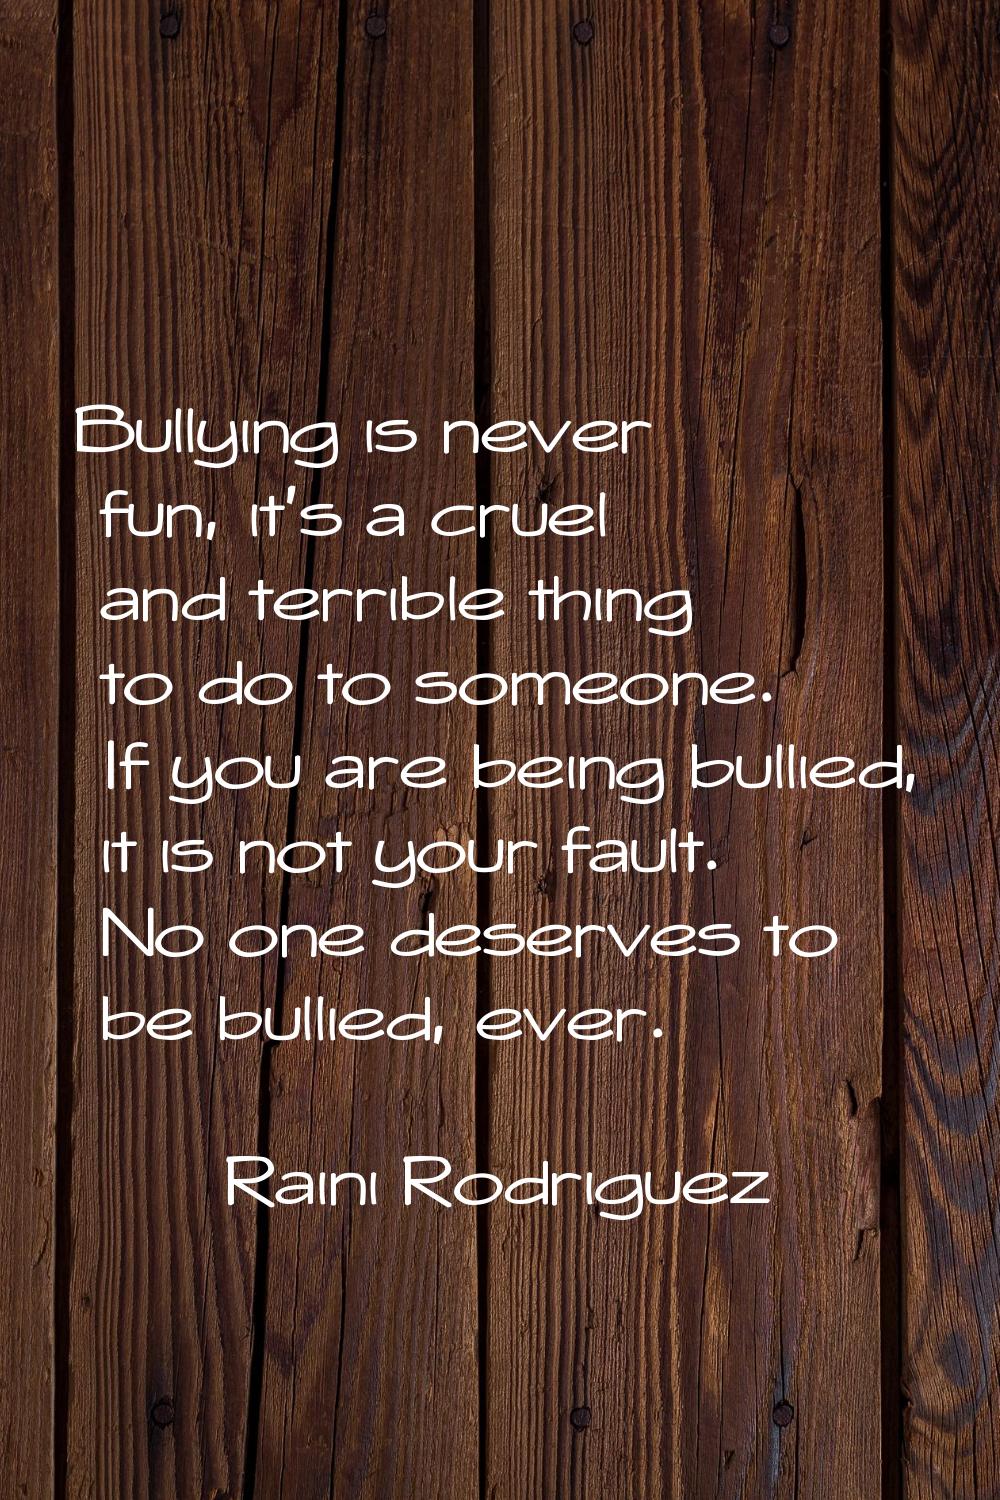 Bullying is never fun, it's a cruel and terrible thing to do to someone. If you are being bullied, 